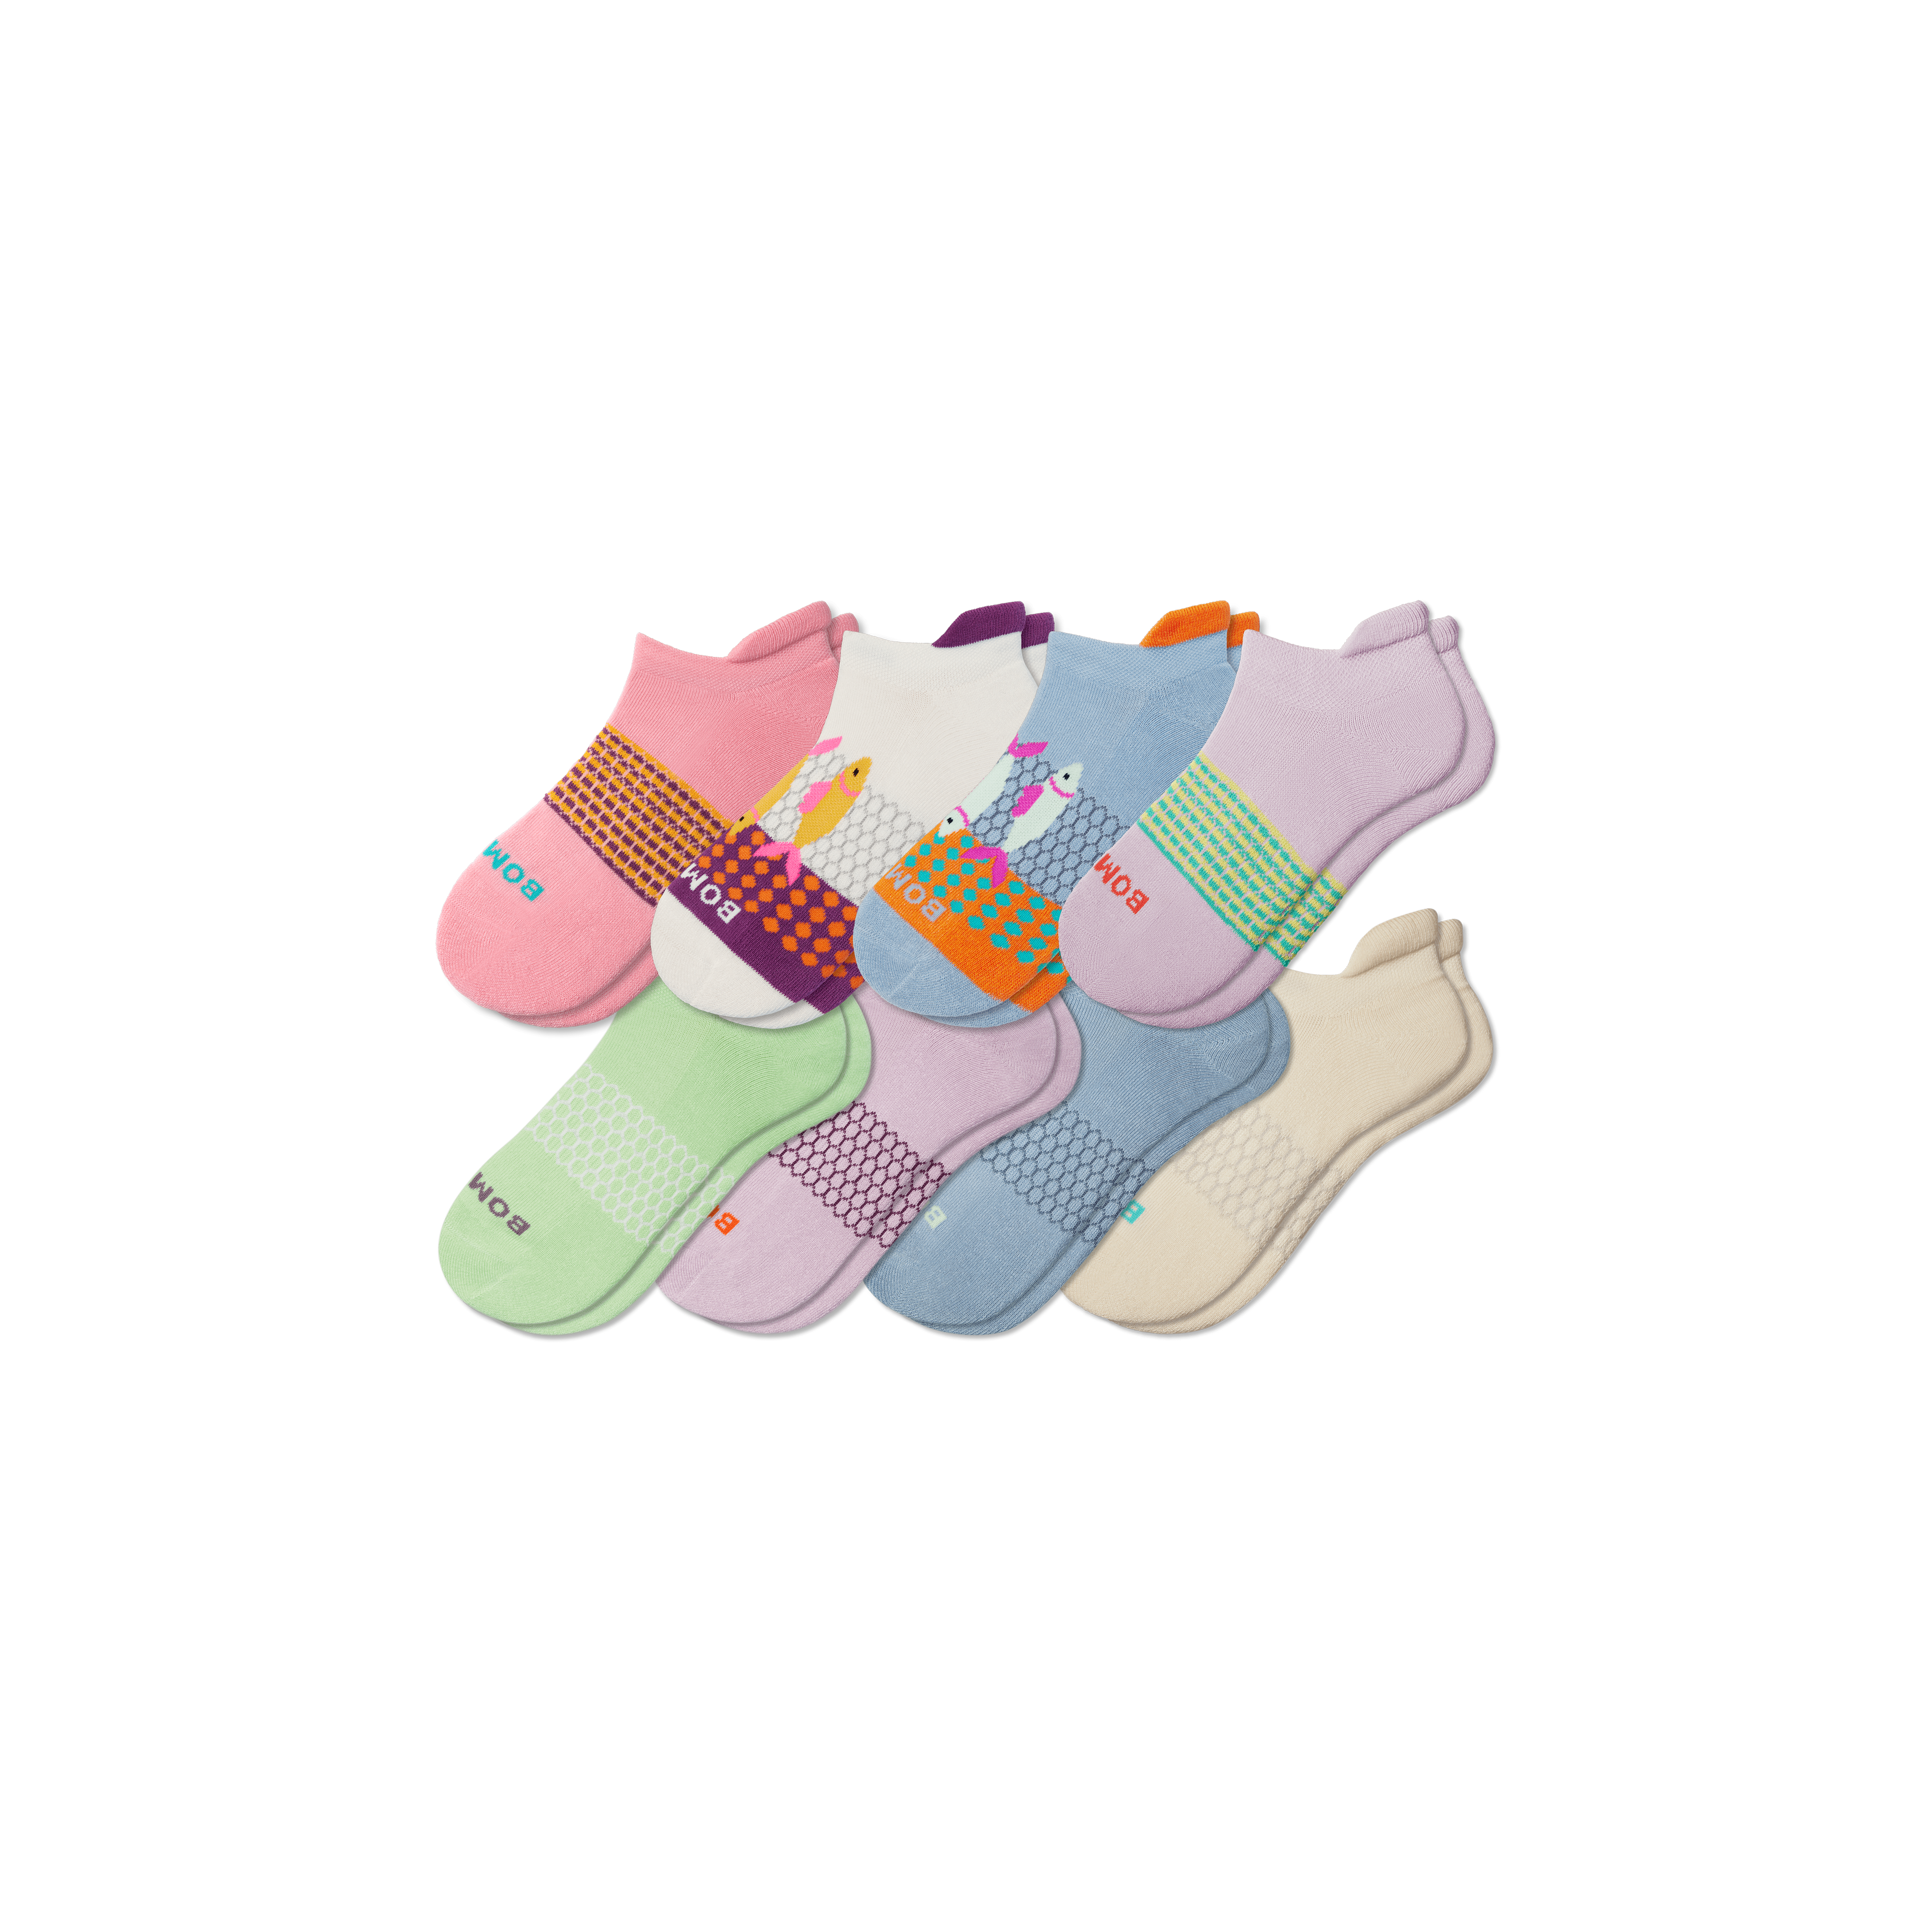 Bombas Ankle Sock 8-pack In Pink Lotus Solids Mix